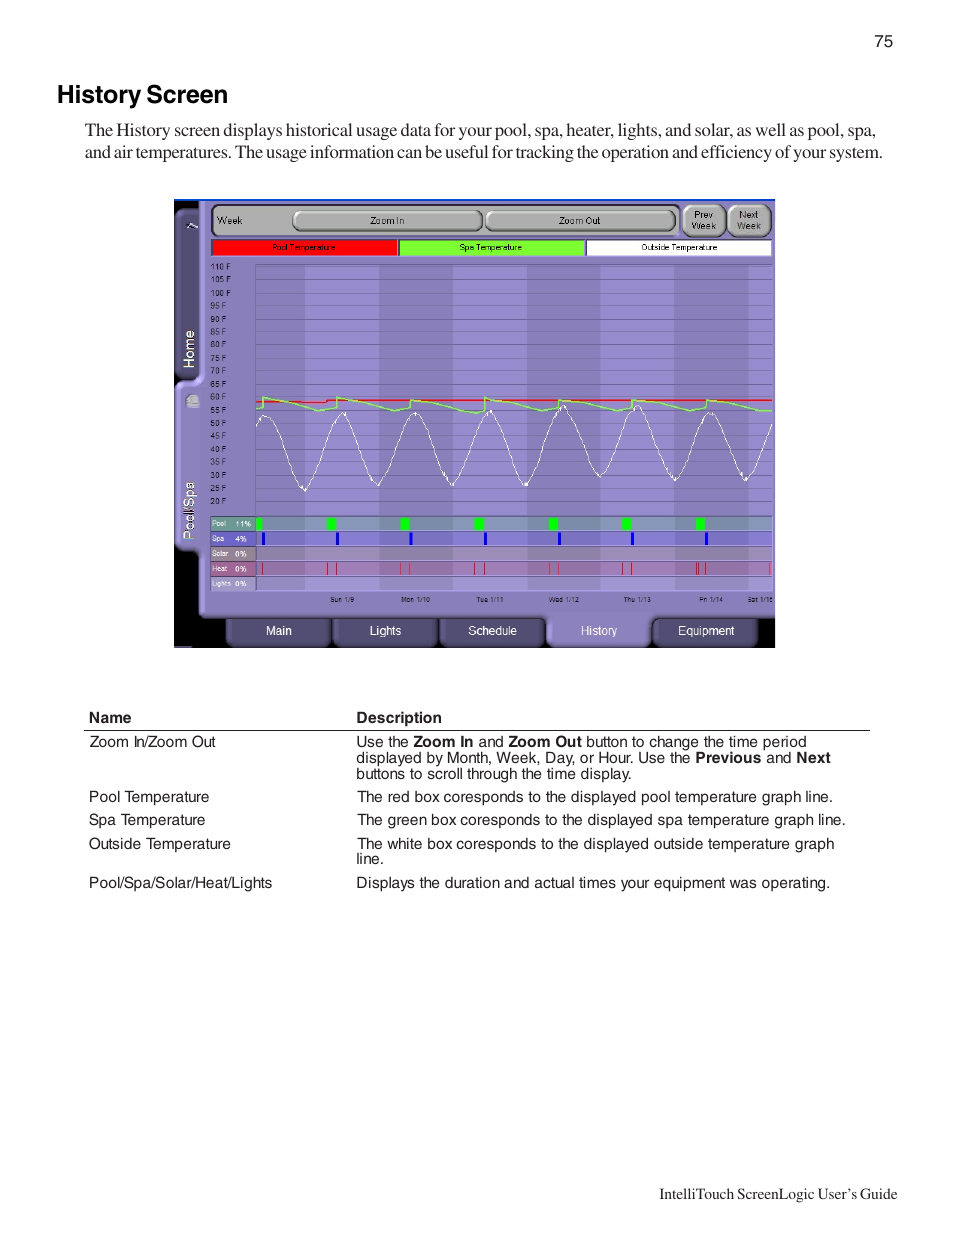 History screen | Pentair Intellitouch ScreenLogic User Manual | Page 85